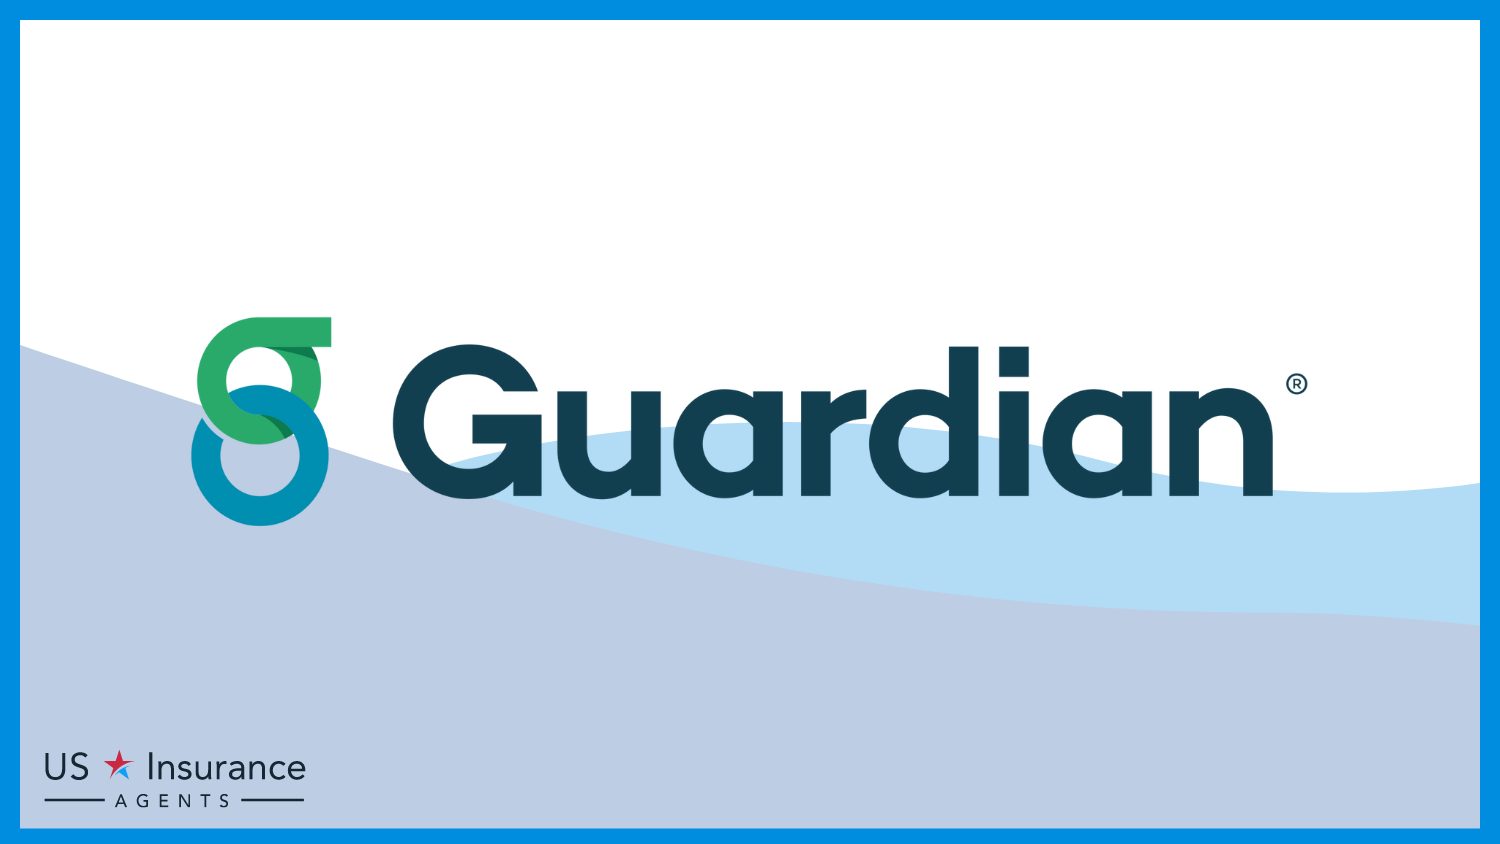 Guradian: Best Life Insurance for a Child’s Father